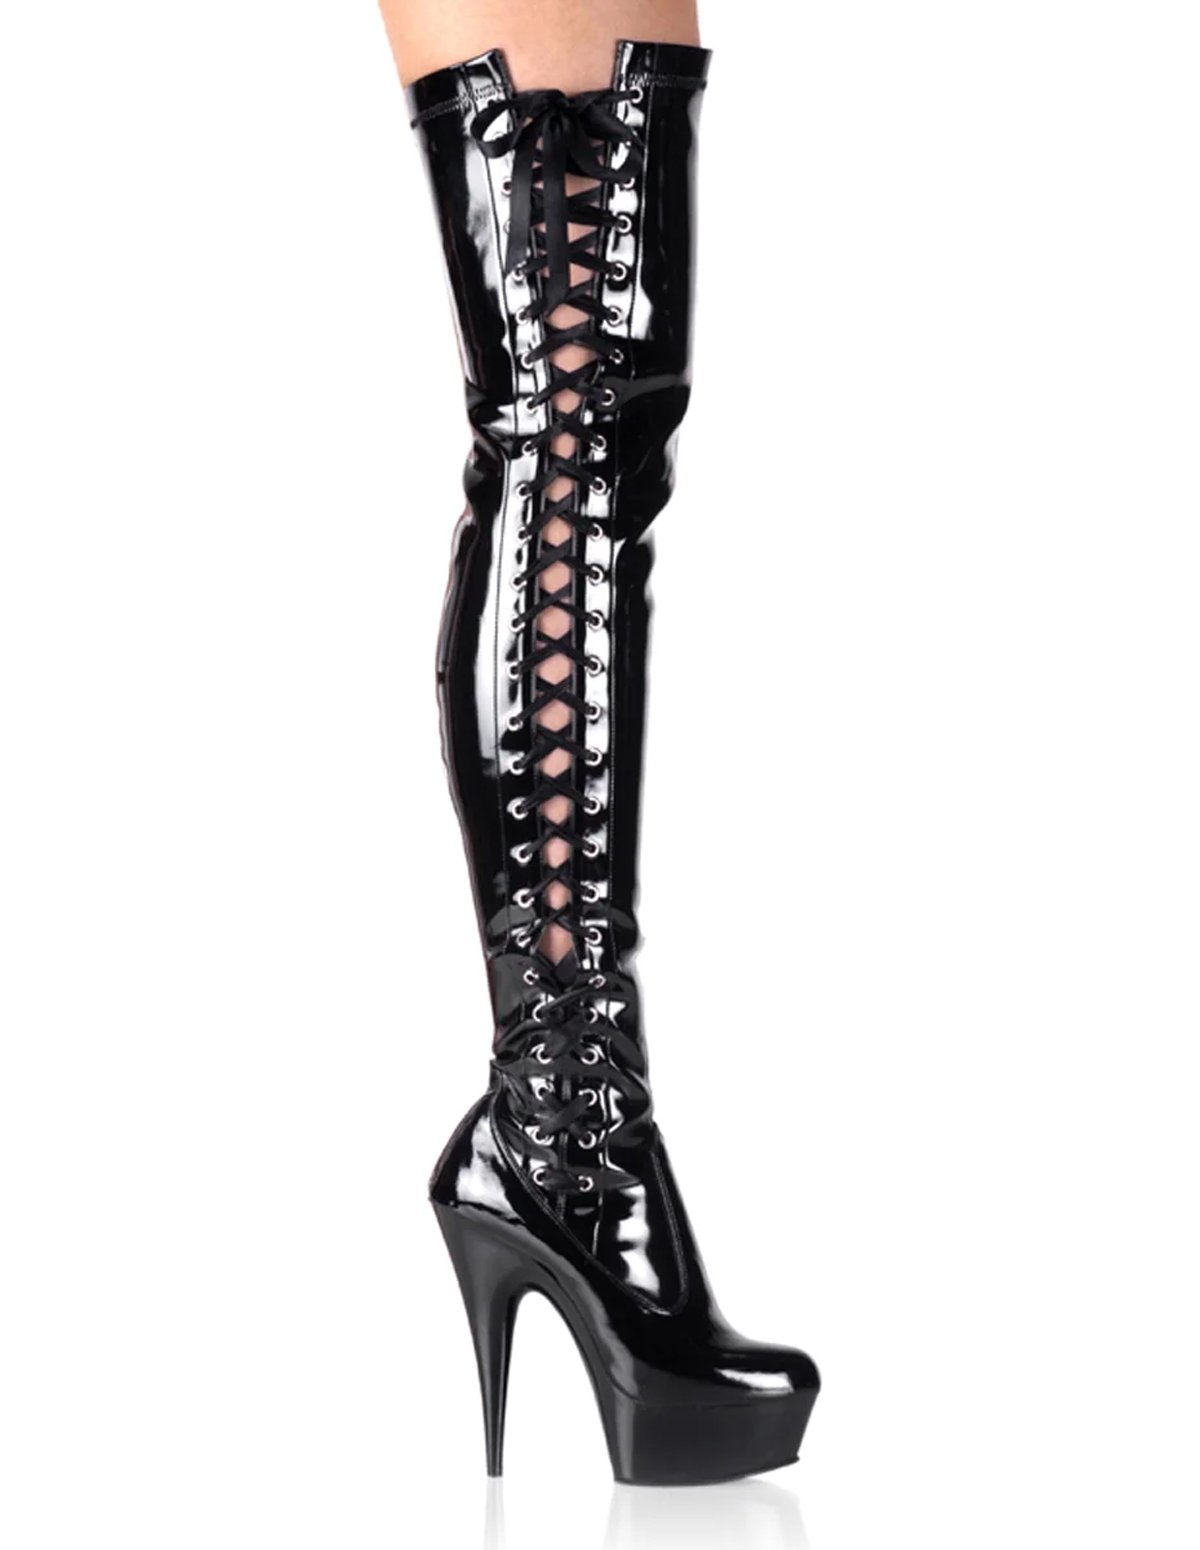 Ashley Patent Lace-Up Thigh High - DELIGHT-3050-05707 | Lover's Lane